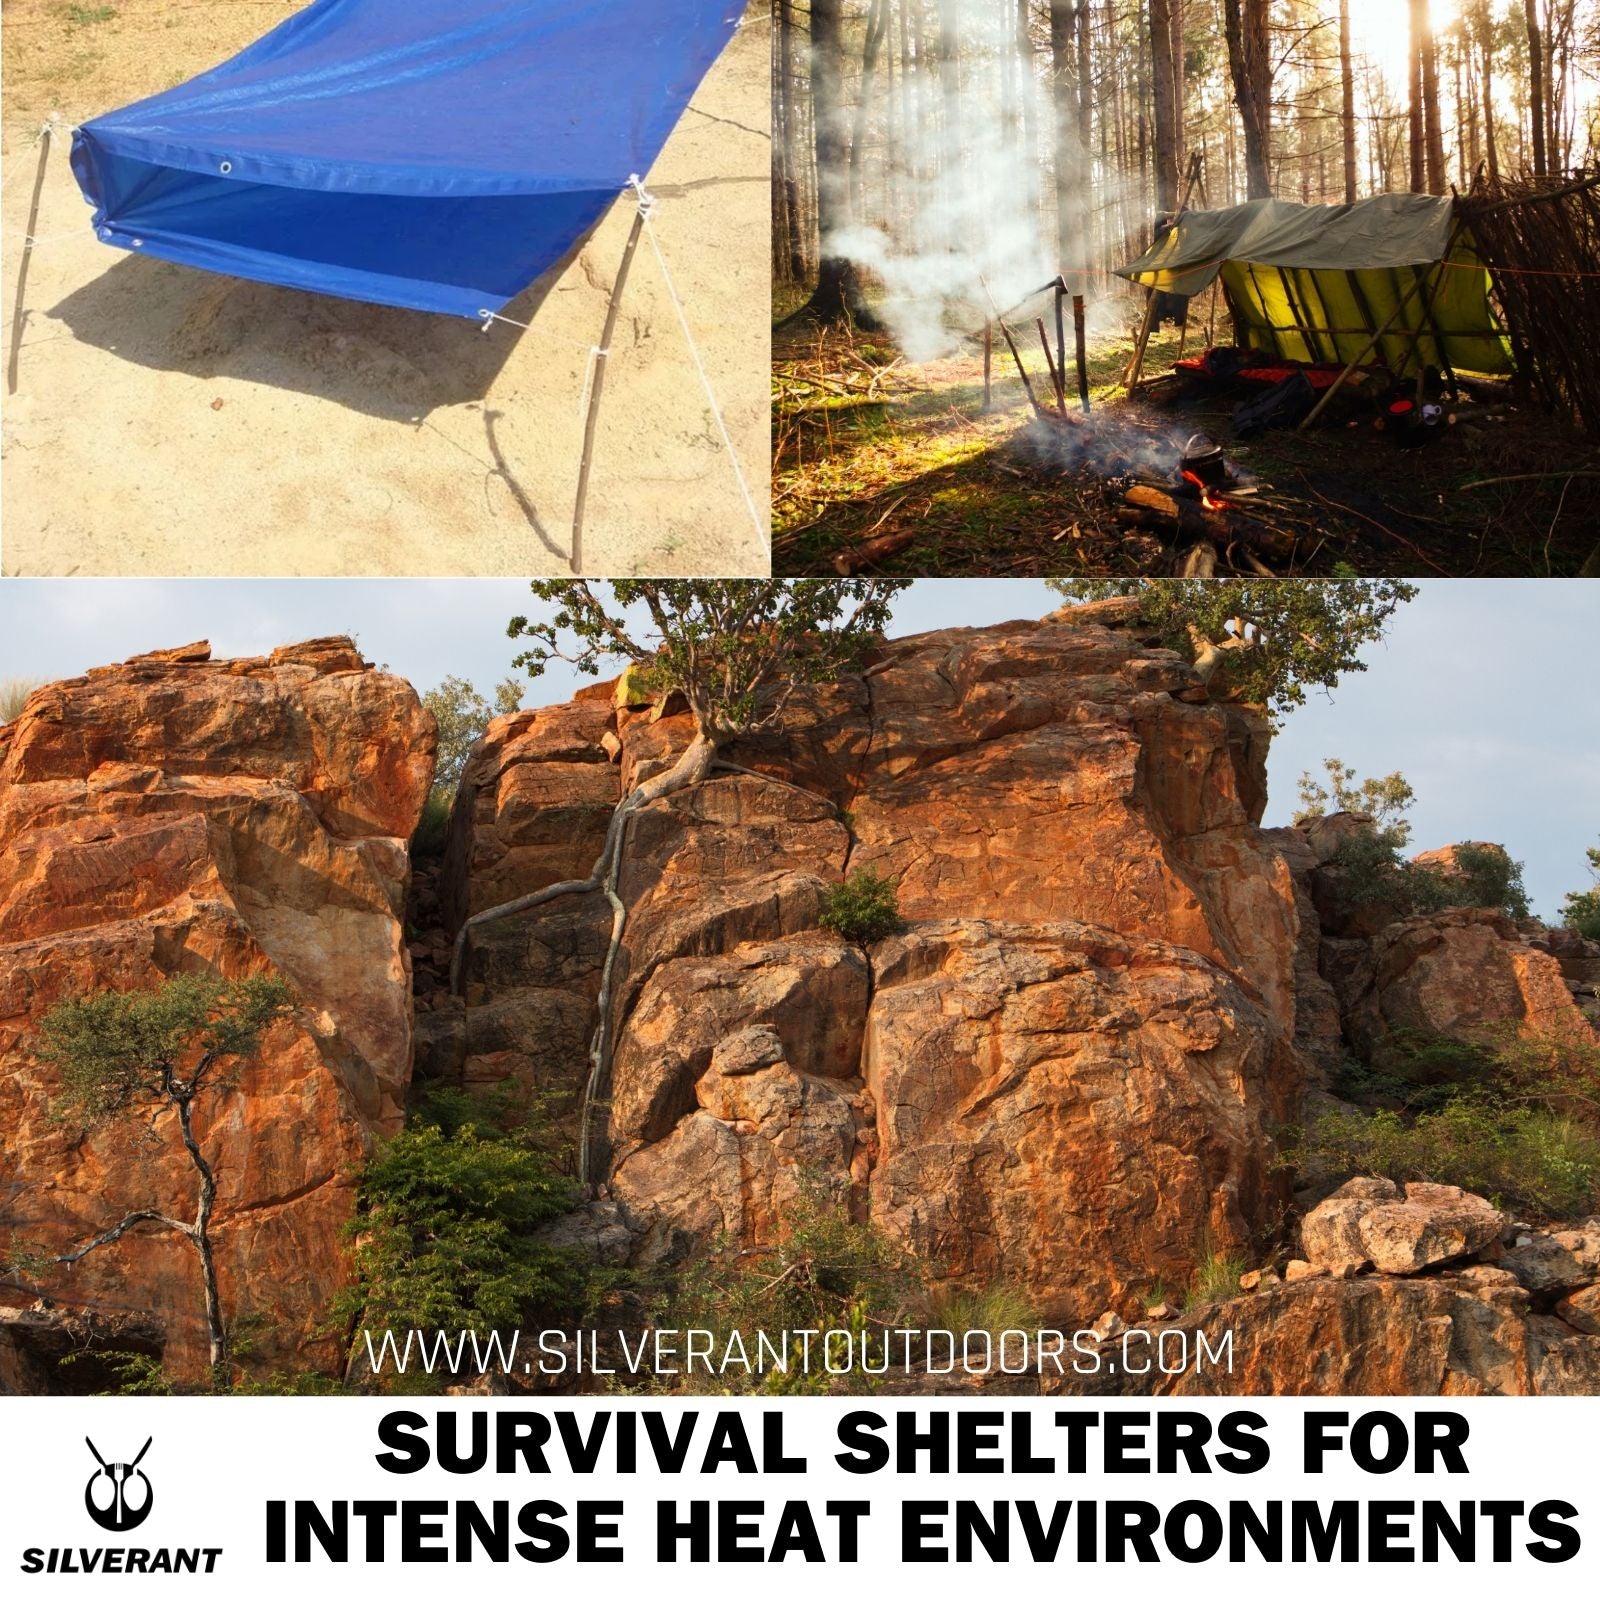 Survival Shelters for Intense Heat Environments